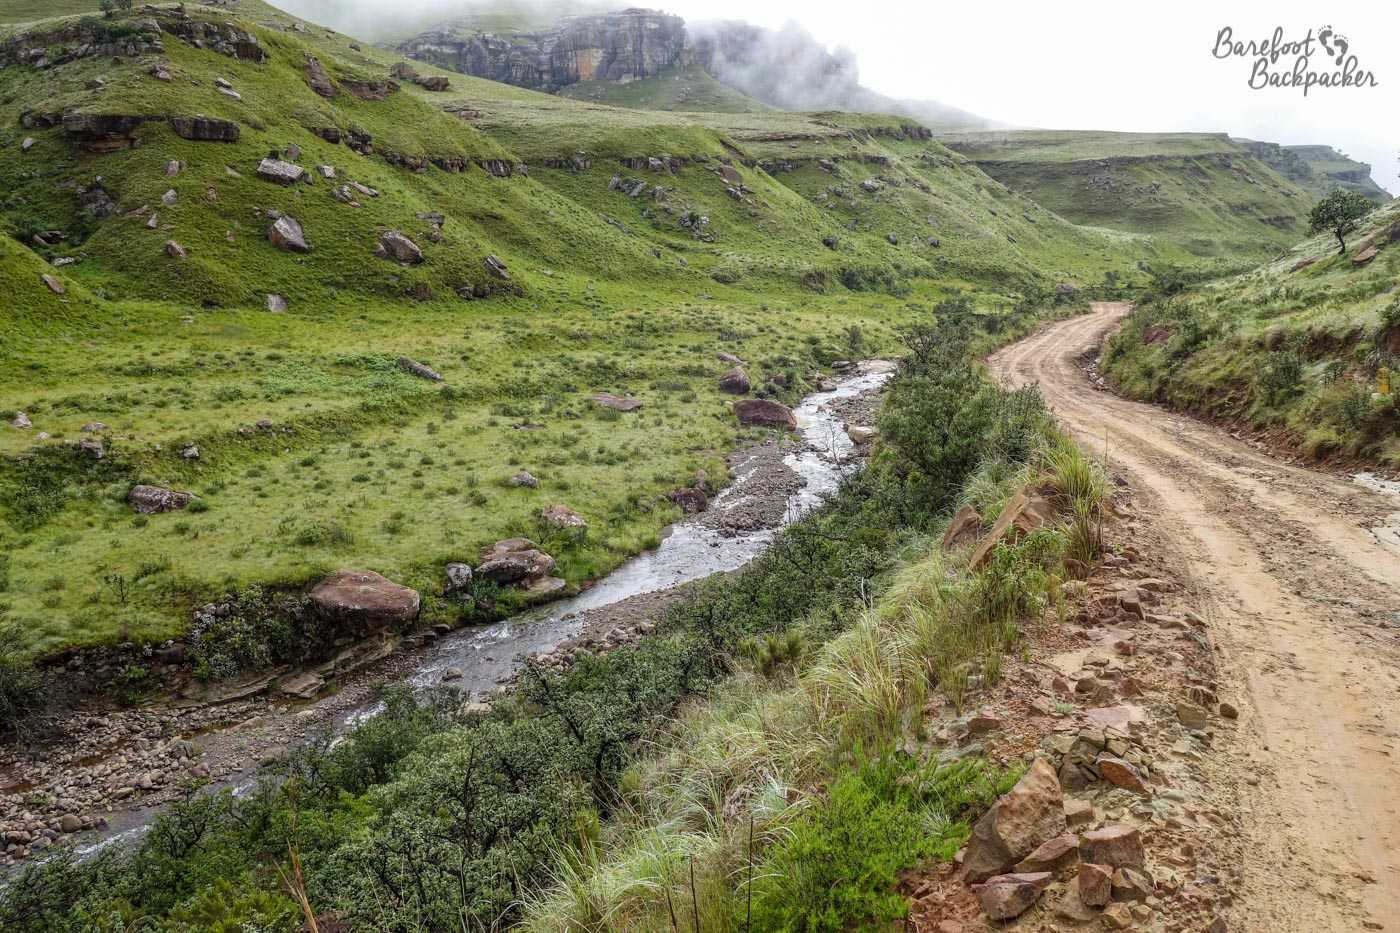 The Sani Pass has reached the flatter plains of South Africa. It's also now a complete mud-heap. Hopefully this is no longer the case.